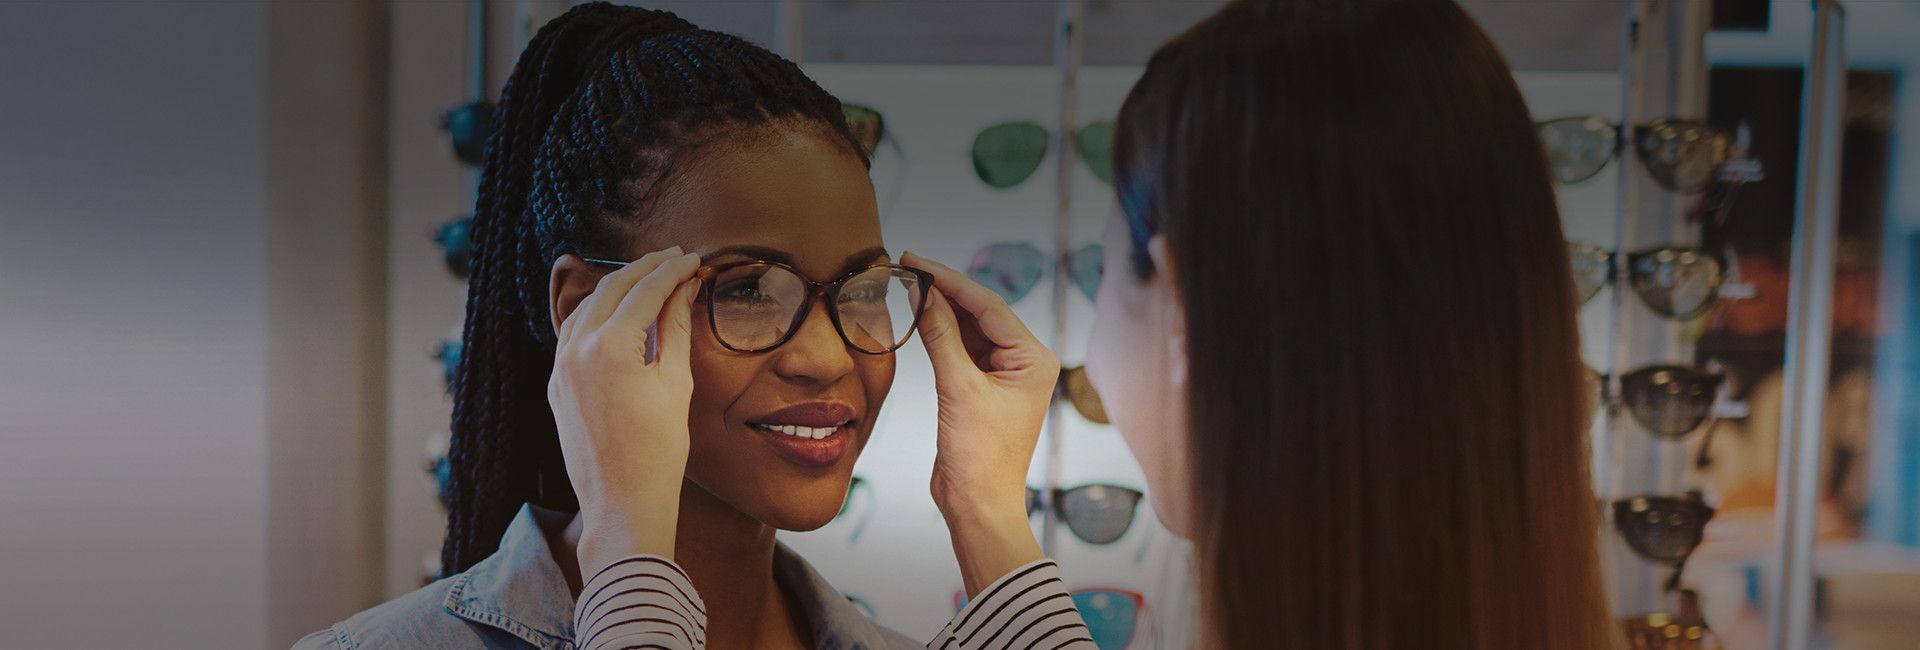 woman fitted for eyeglasses